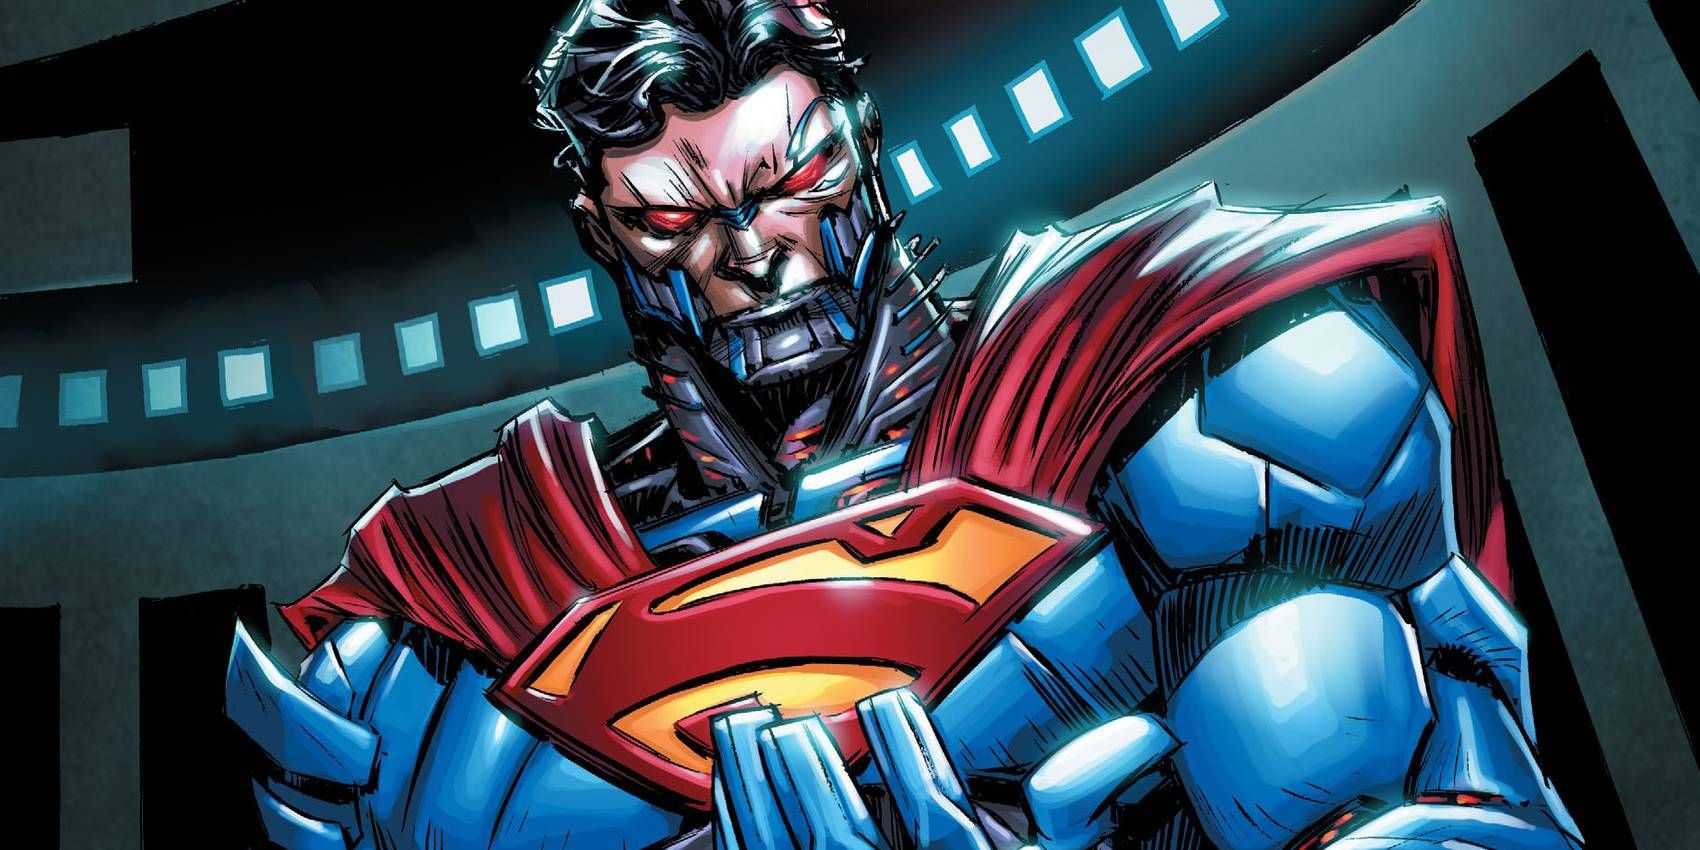 Cyborg Superman looking down at his hands in DC Comics